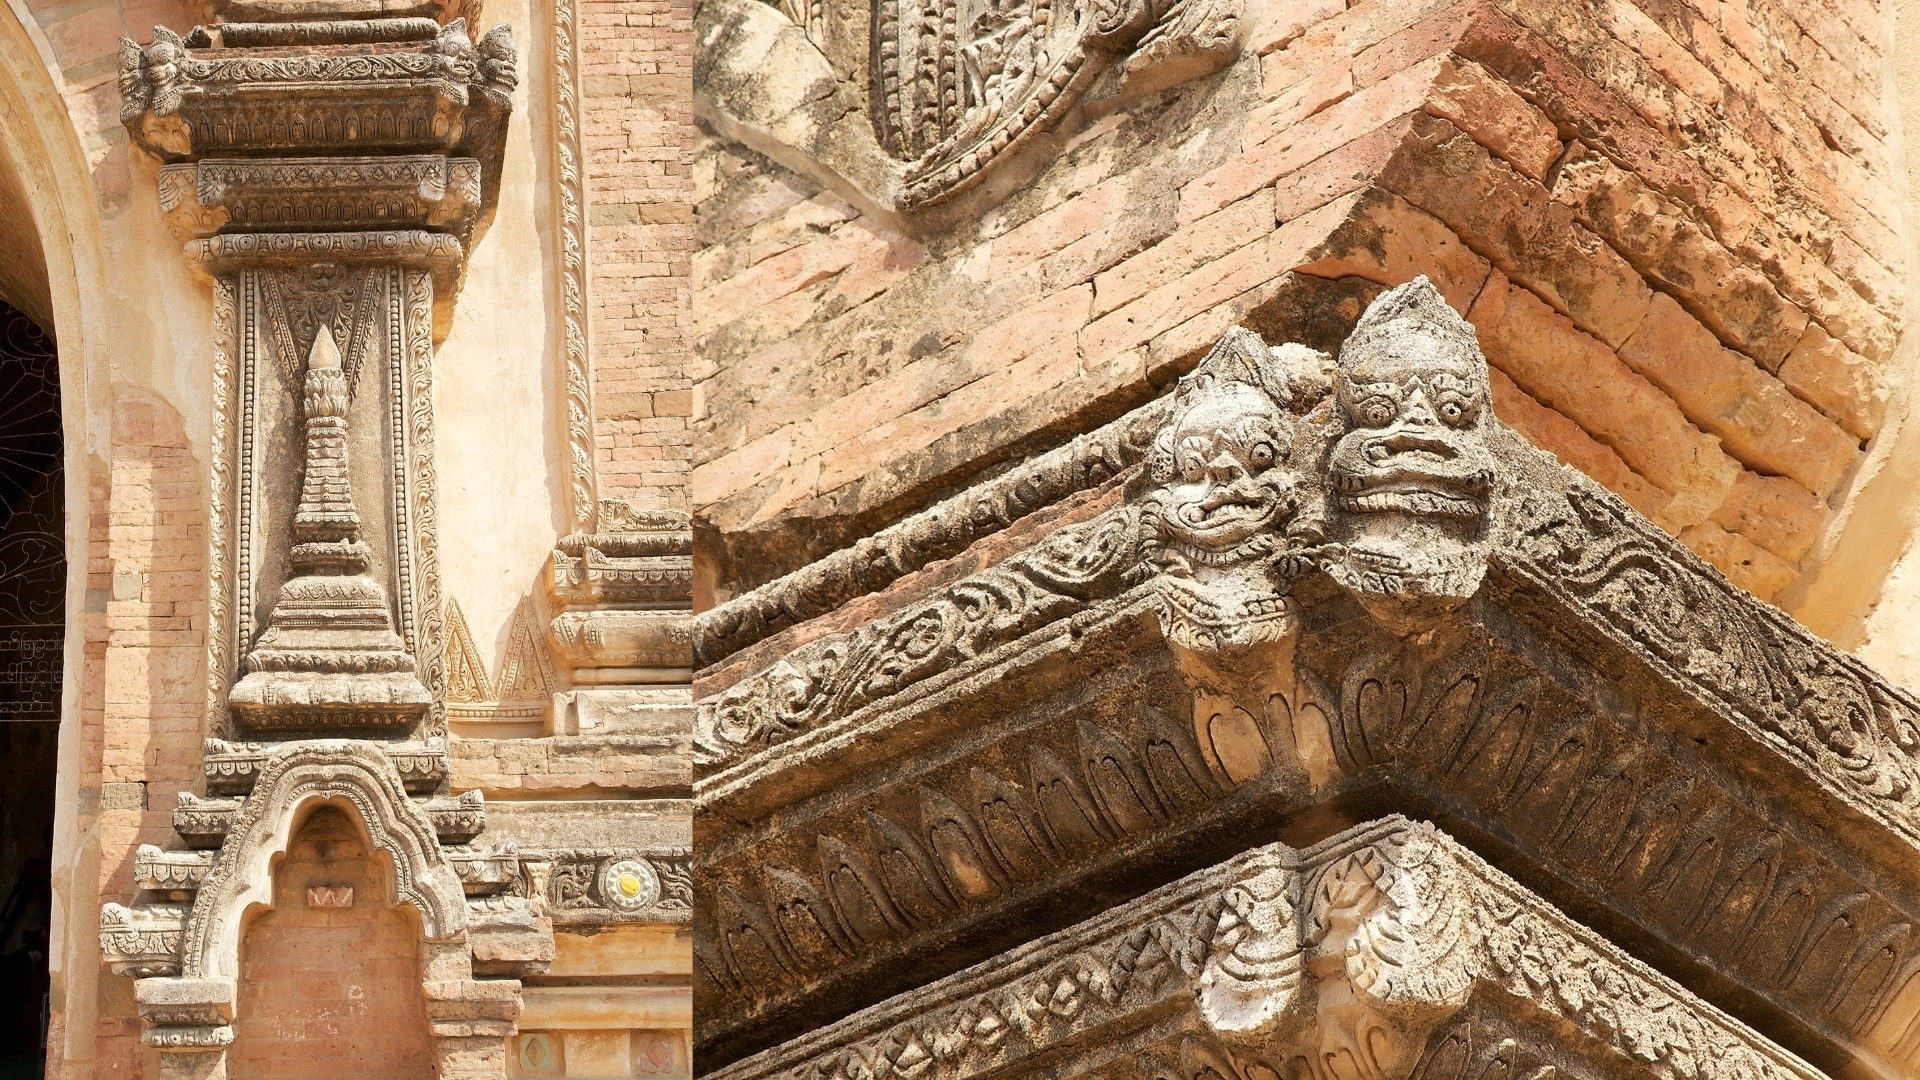 Pilasters And Pillars Were Adorned With Intricate Carvings